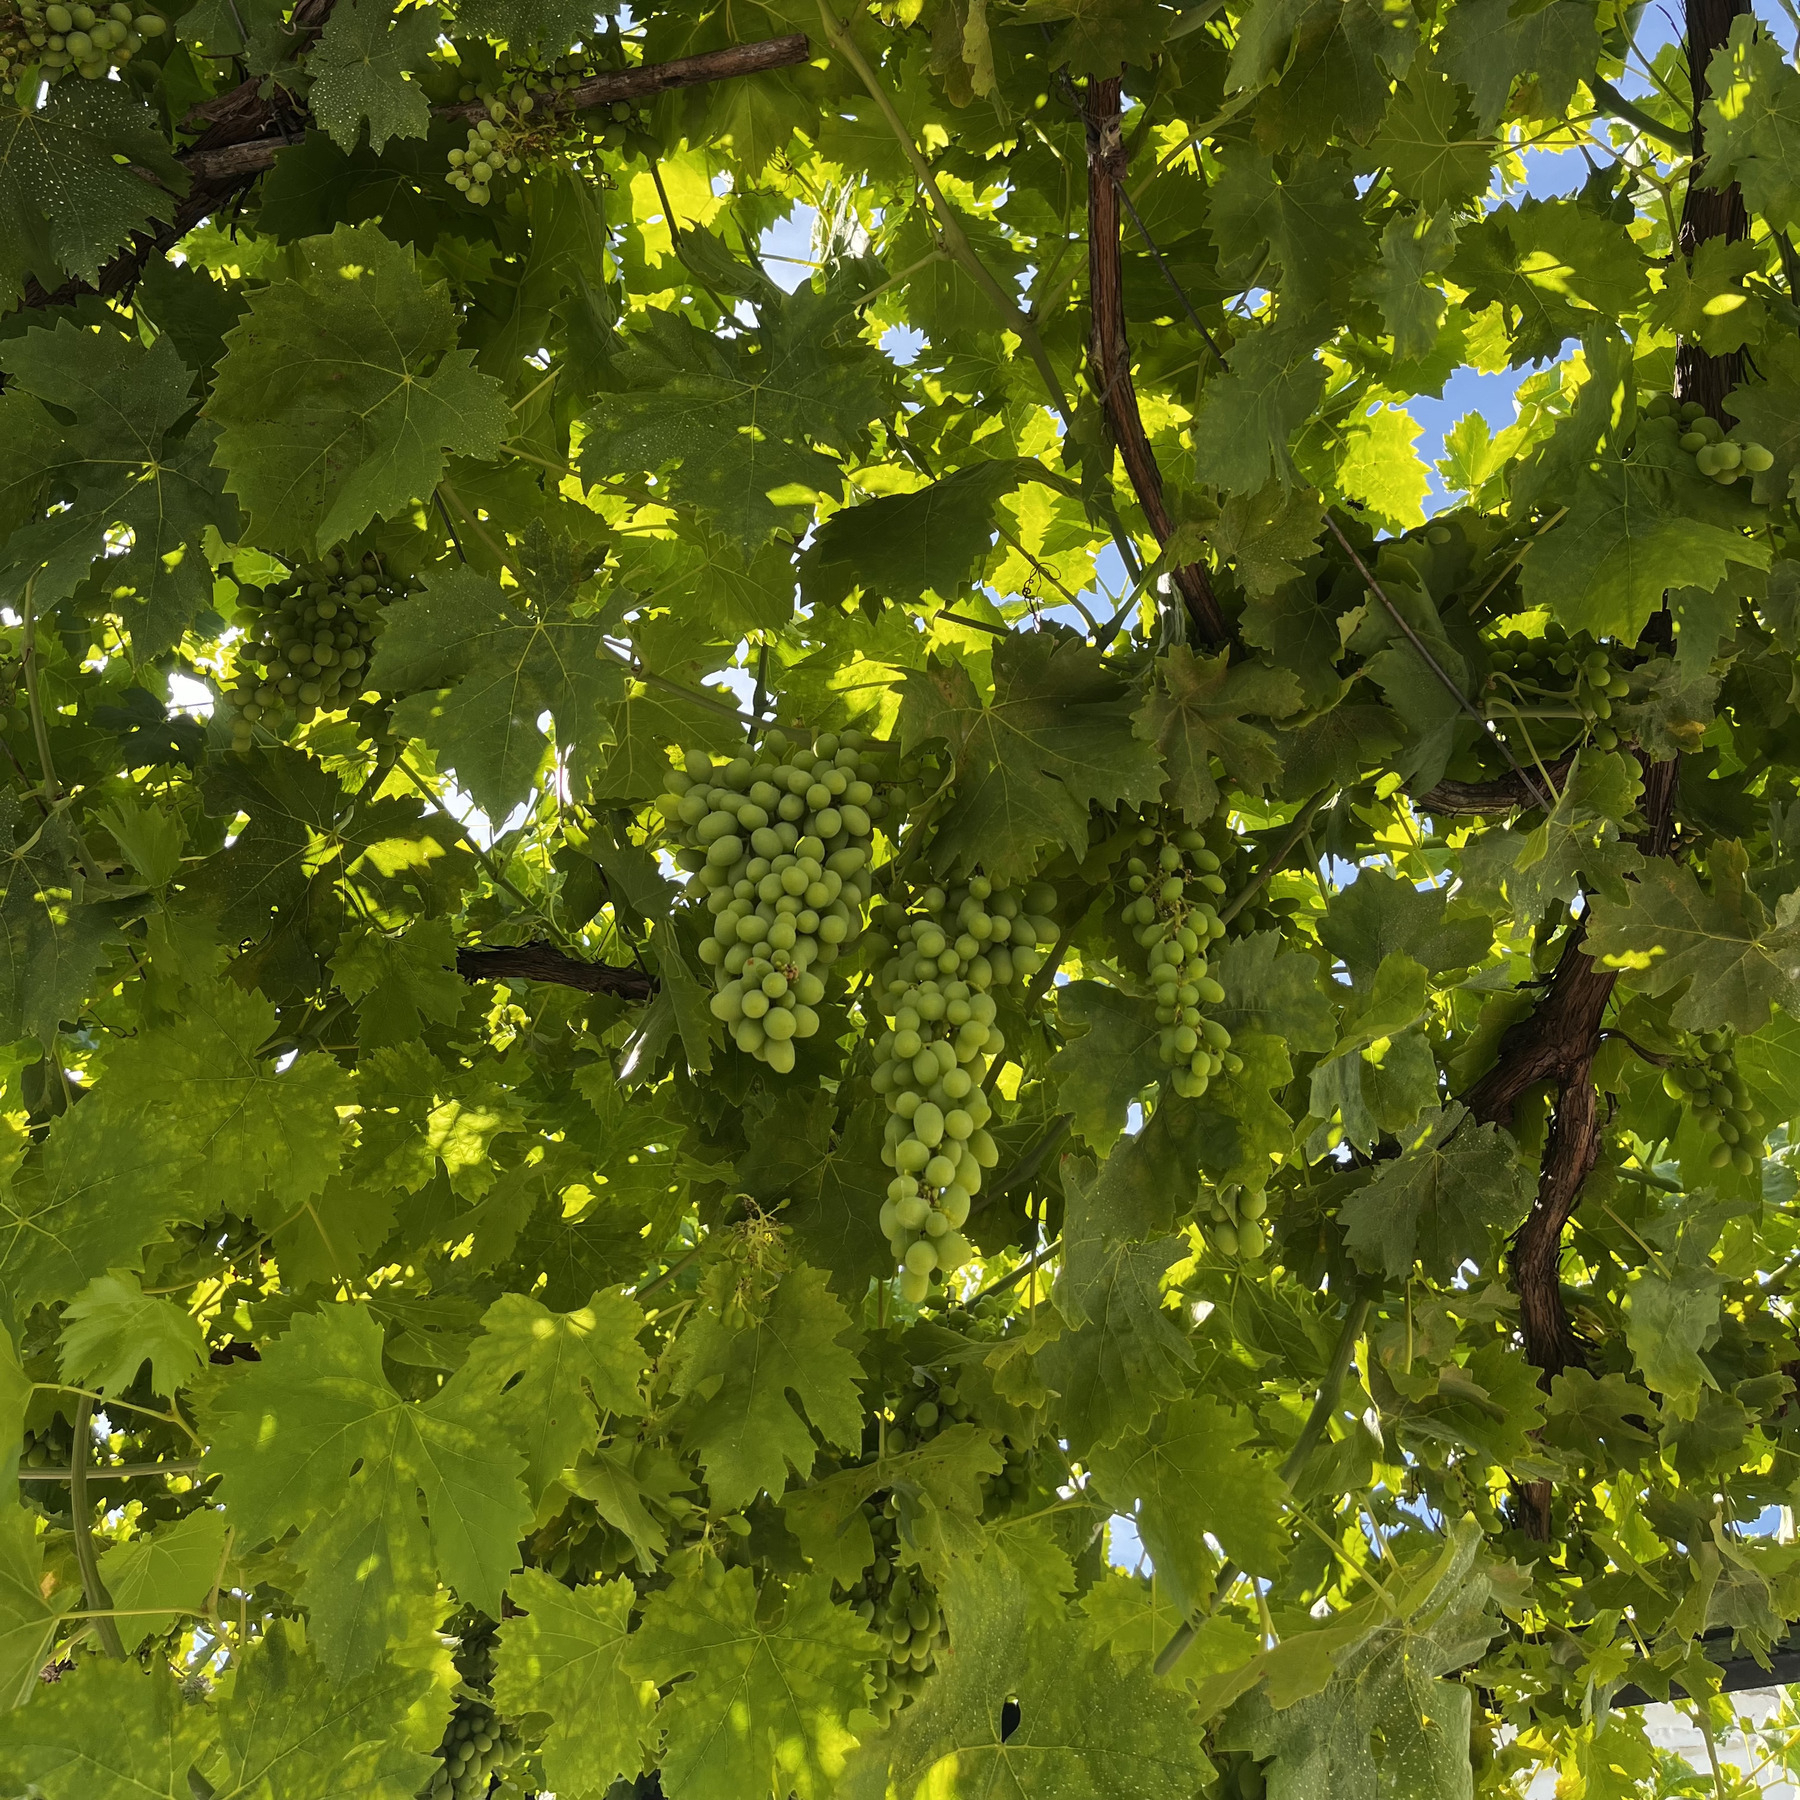 Fresh grapes growing on the vine, the vine acting as a shade above from the sun